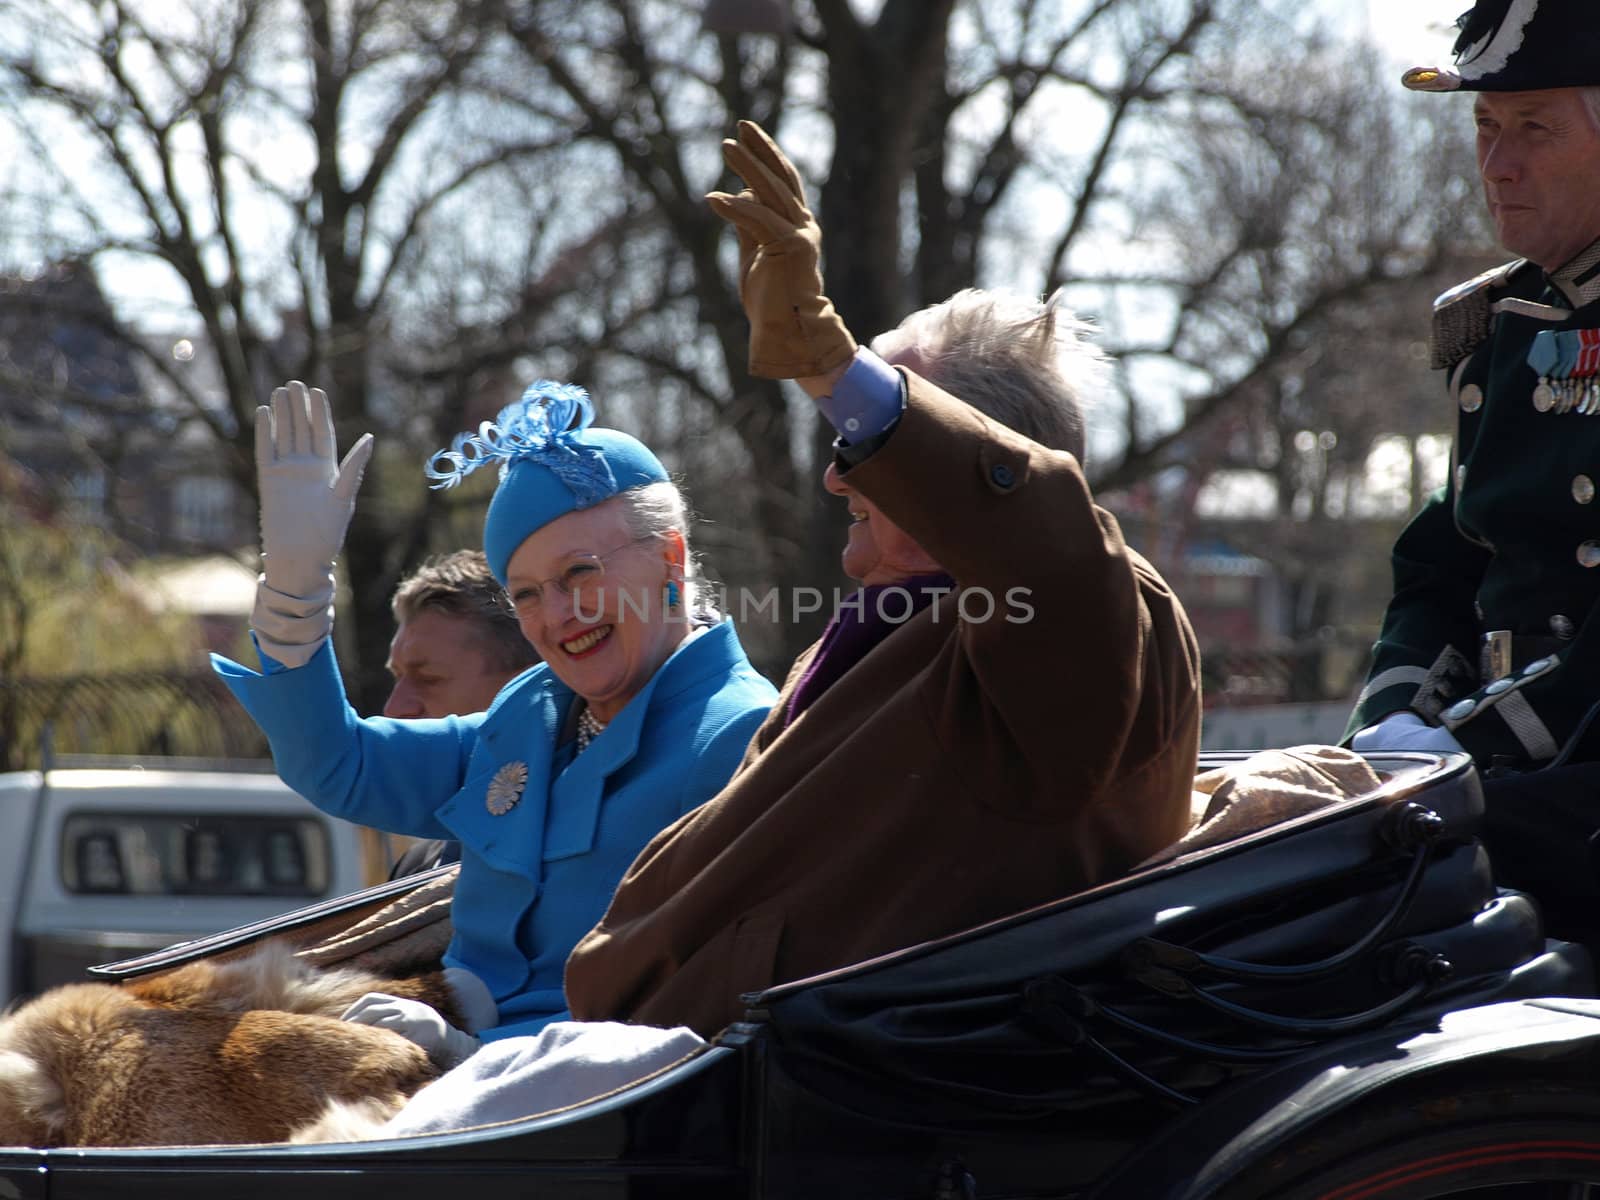 COPENHAGEN - APR 16: Denmark's Queen Margrethe celebrates her 70th birthday with other European Royals. The Queen rides an open carriage escorted by Hussars to Copenhagen City Hall on April 16, 2010.   